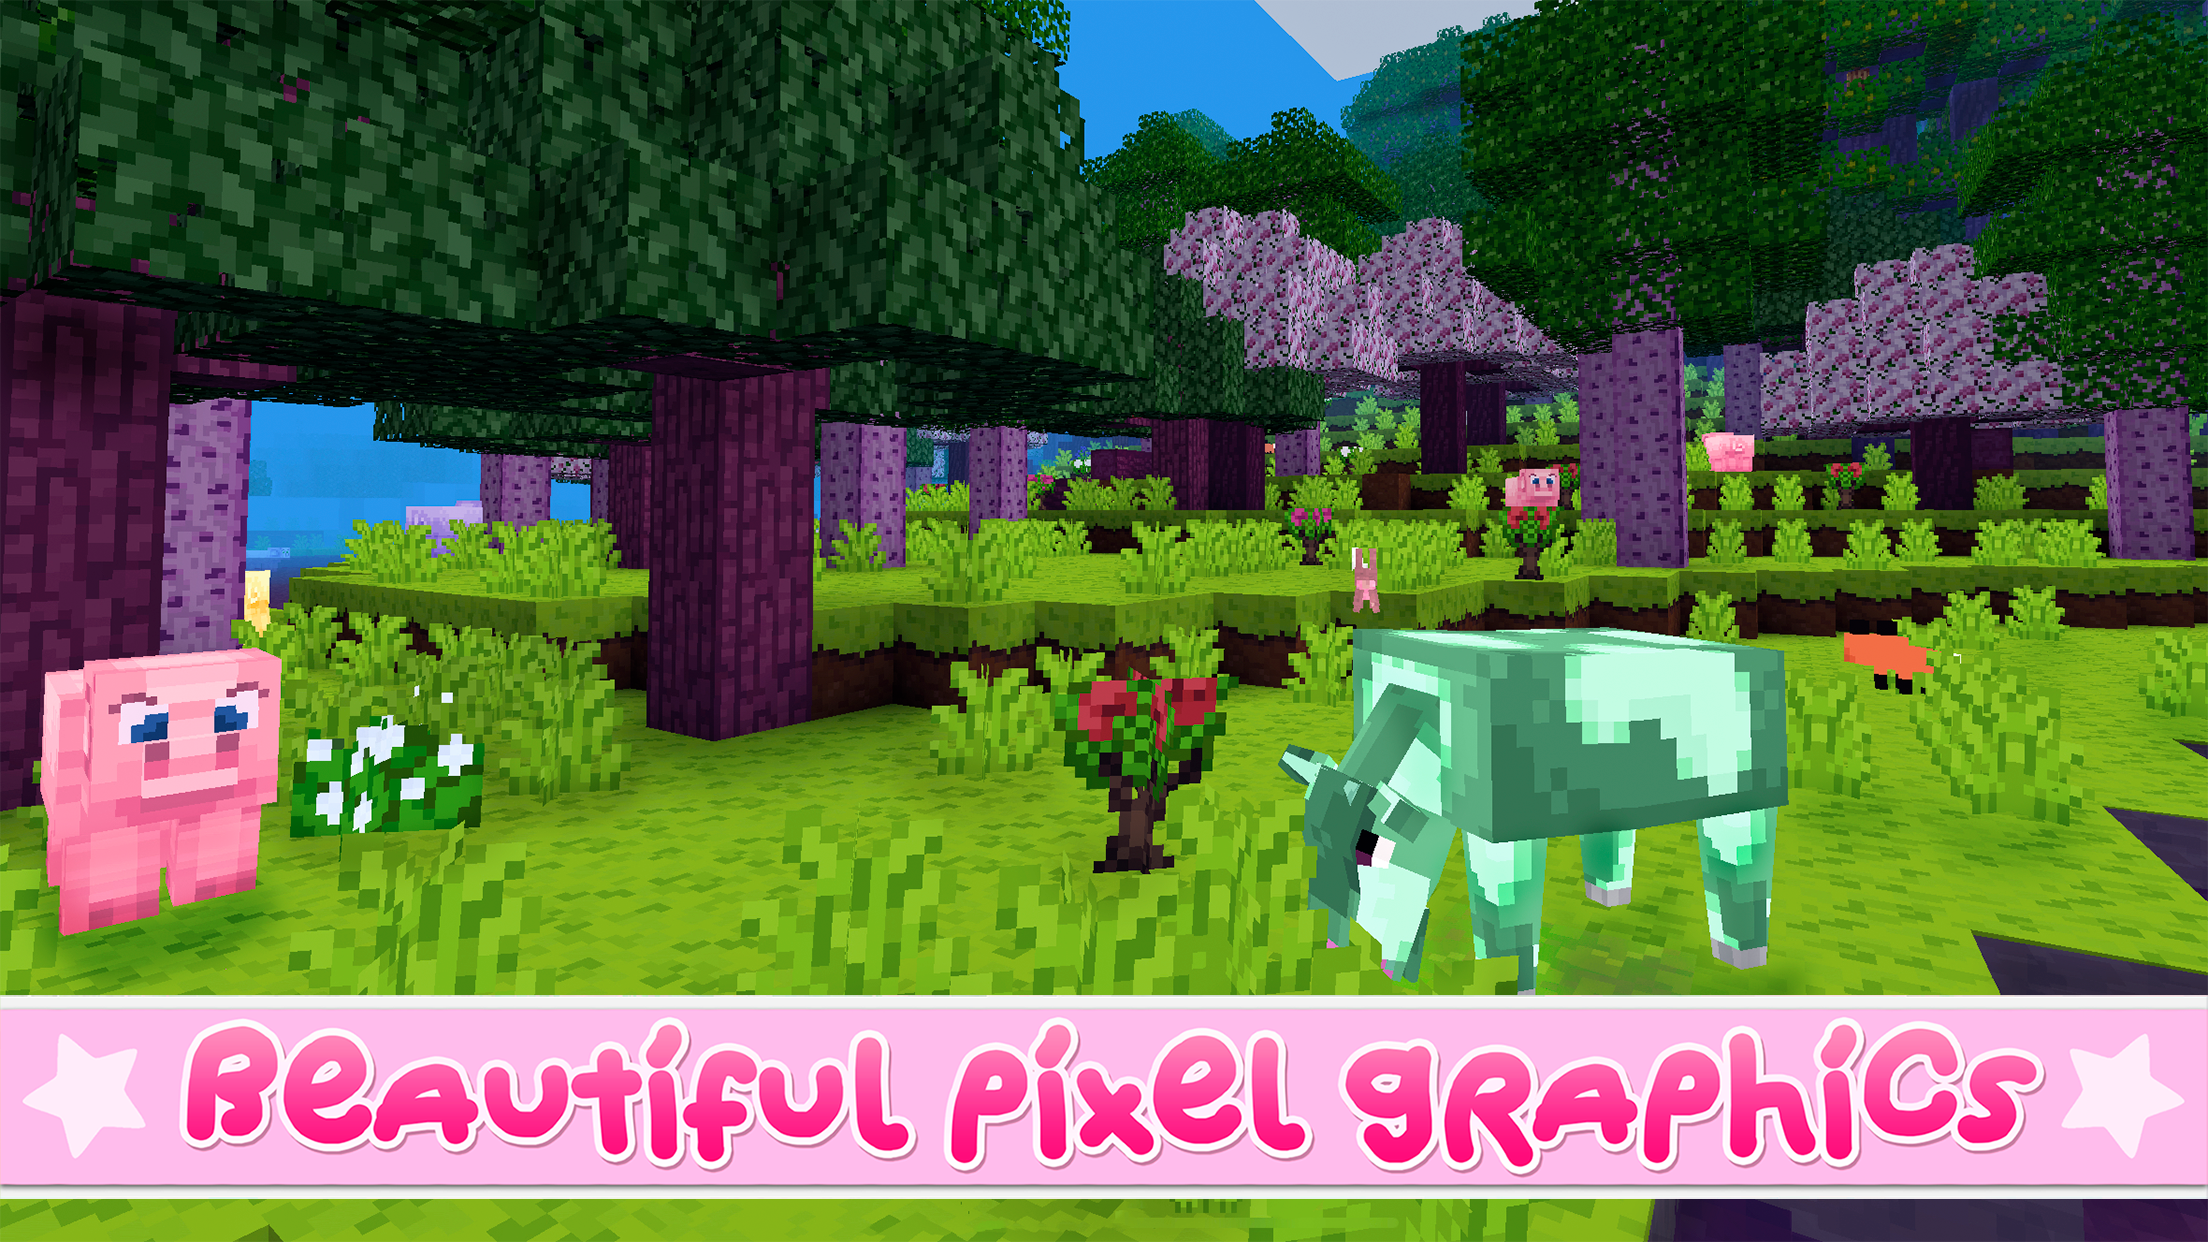 Kawaii Craft 2021 Game for Android - Download